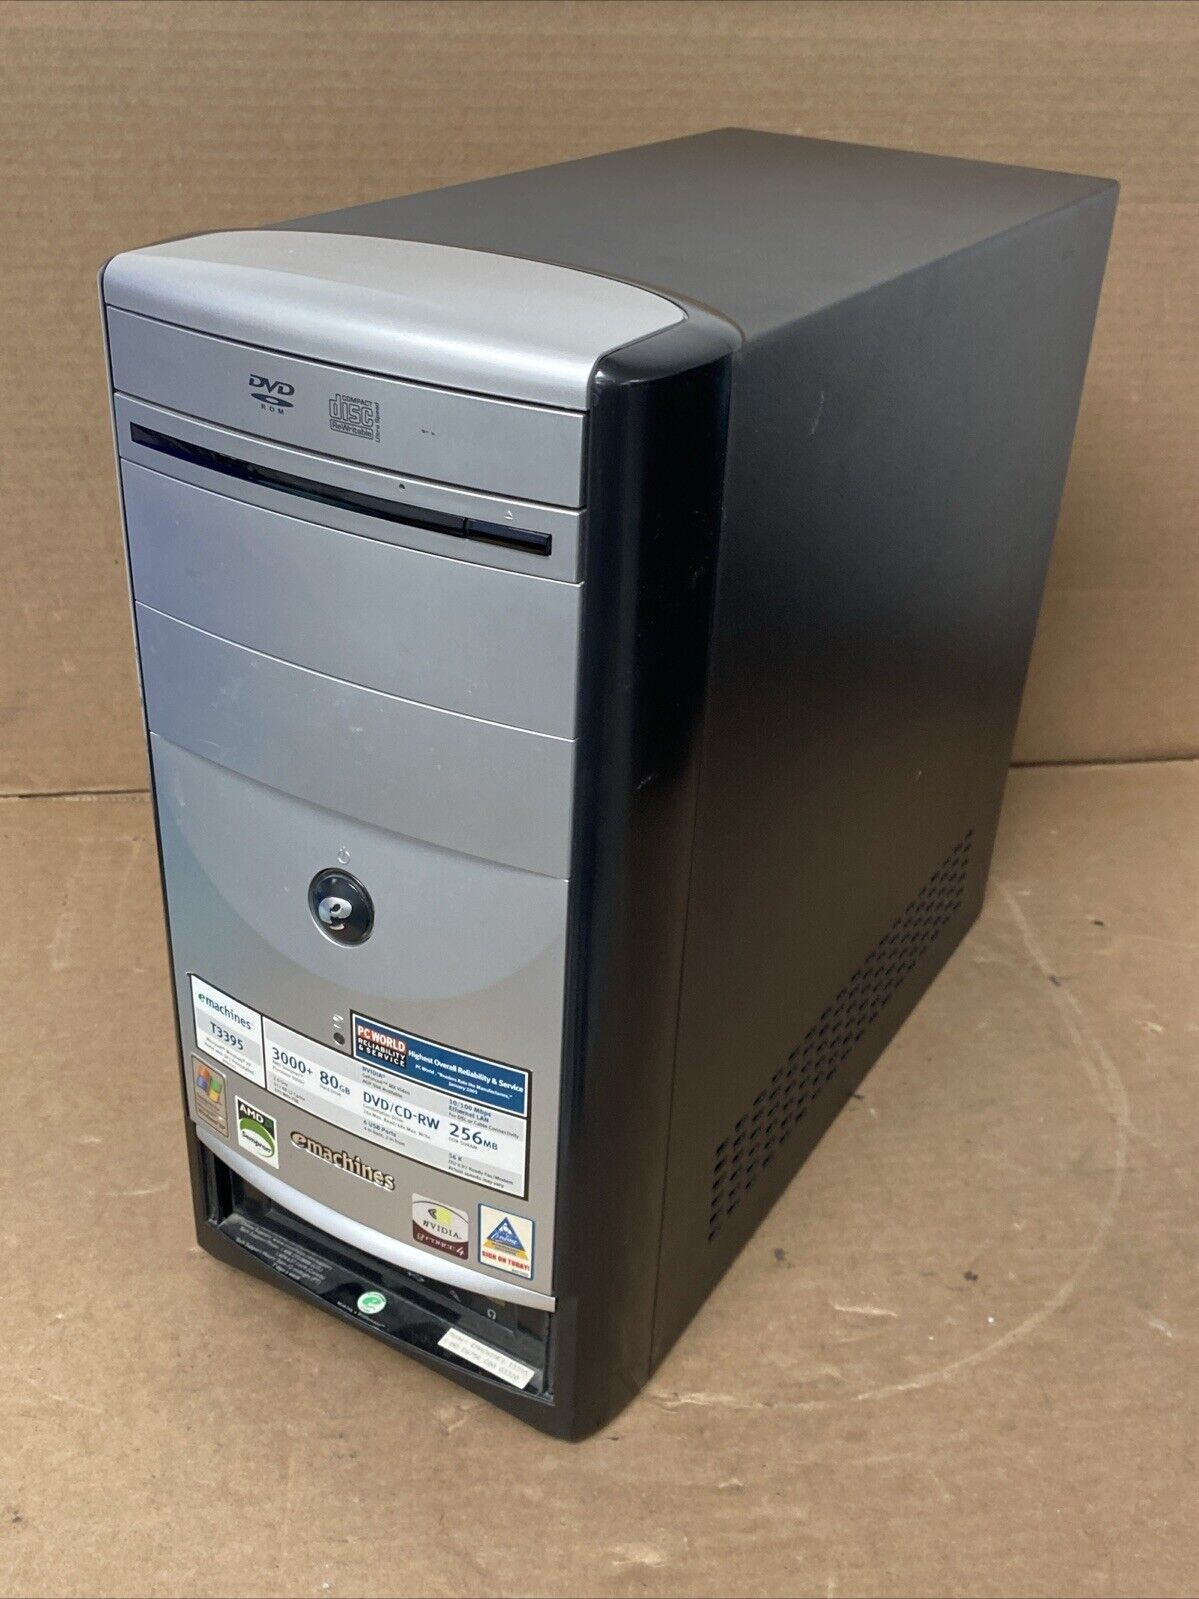 eMachines T3395 Tower - AMD Sempron 3000+ 2.00GHz 512MB RAM 80GB HDD - NO OS